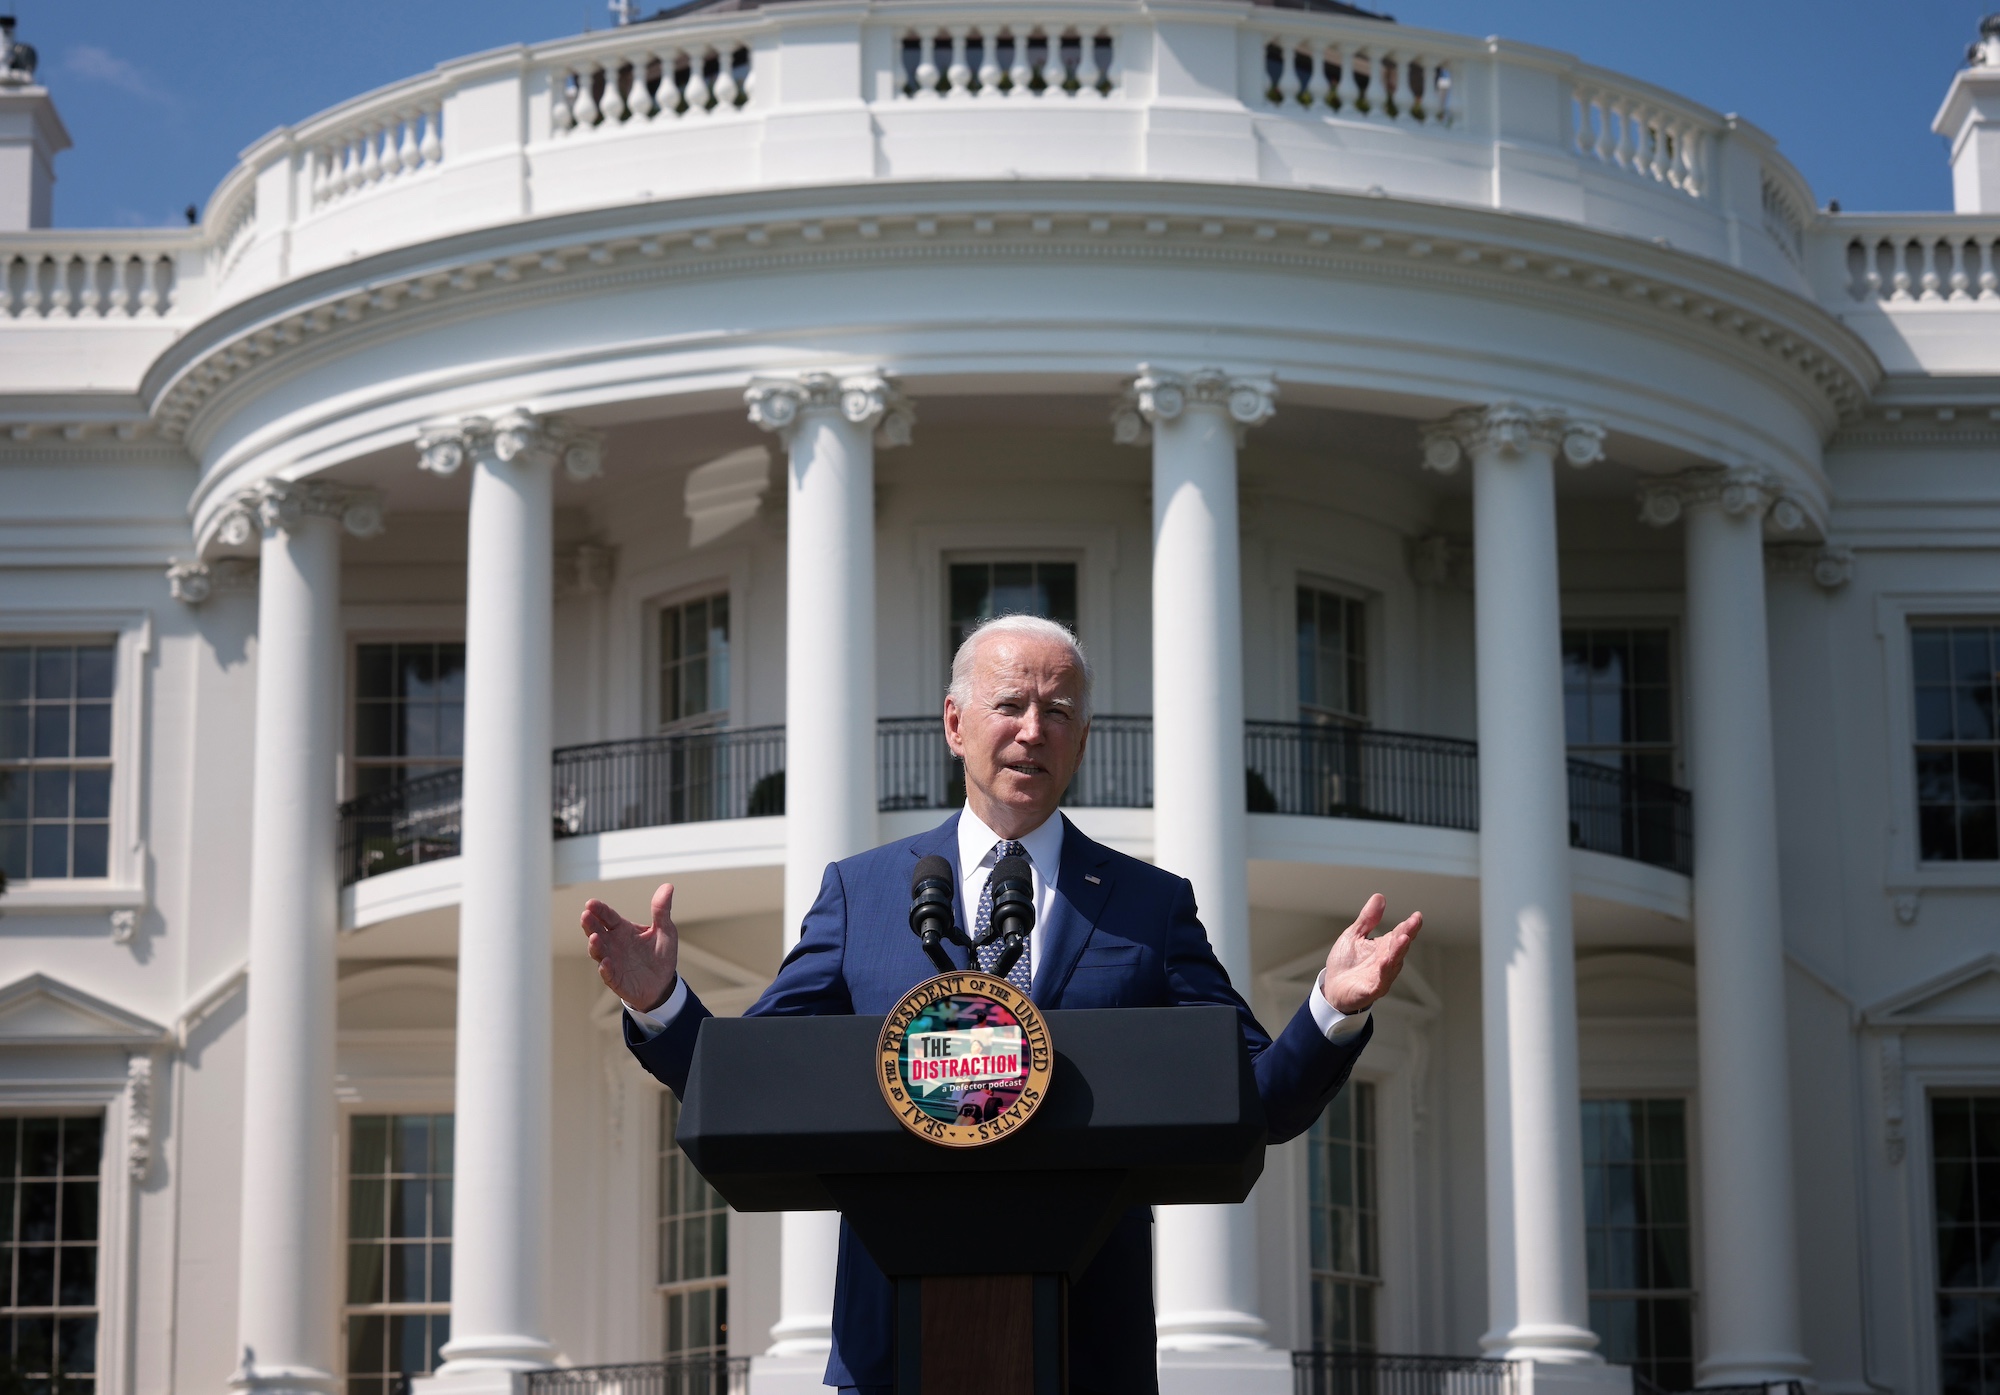 WASHINGTON, DC - AUGUST 05: U.S. President Joe Biden delivers remarks during an event on the South Lawn of the White House August 5, 2021 in Washington, DC. Biden delivered remarks on the administration’s efforts to strengthen American leadership on clean cars and trucks. (Photo by Win McNamee/Getty Images)